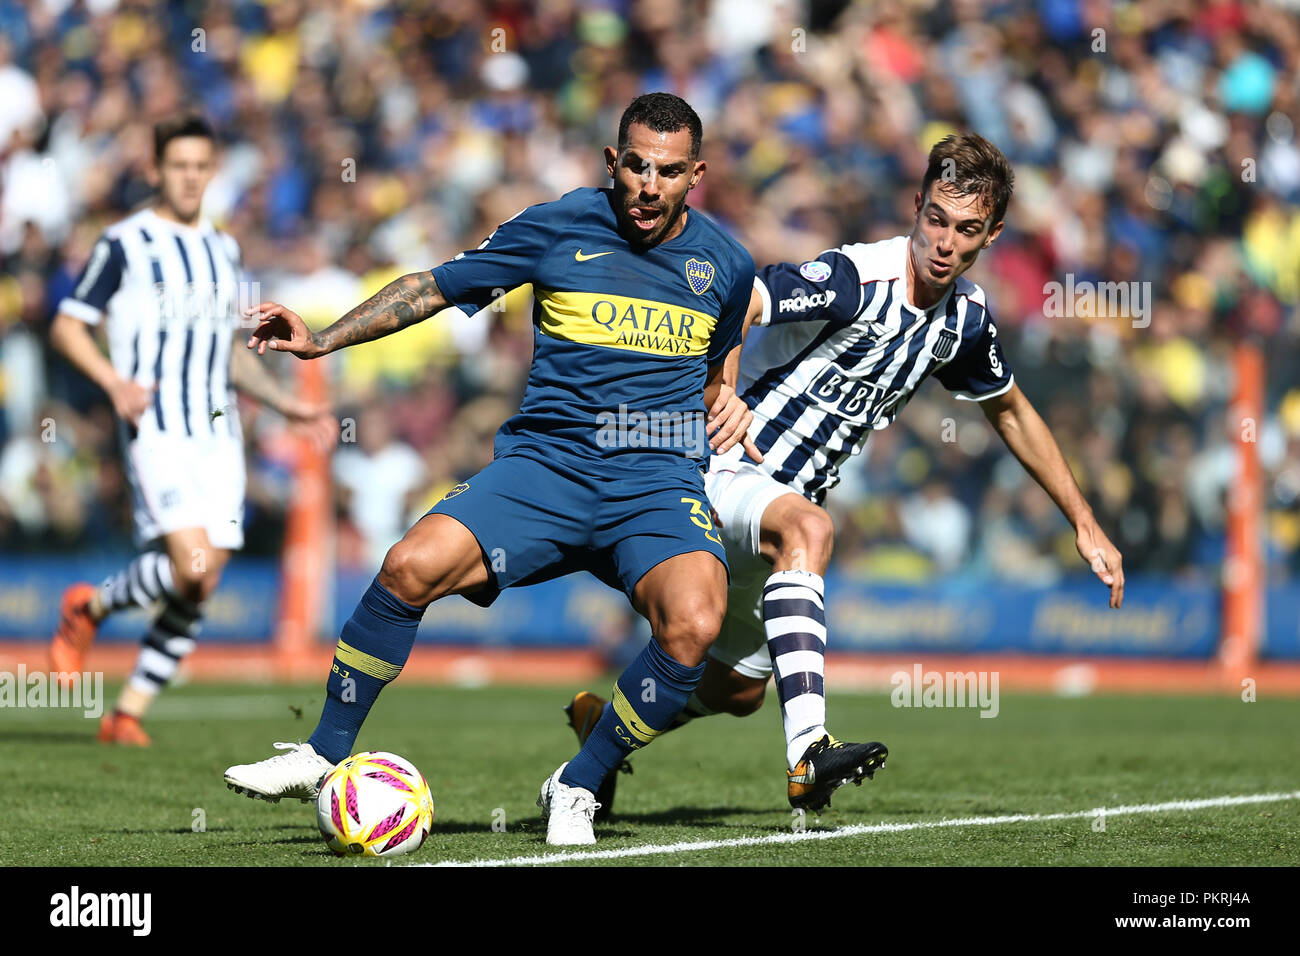 BUENOS AIRES, ARGENTINA - AUGUST 2018: Carlos Tevez (Boca Juniors) fights the ball against el Chapo (Talleres de Cordoba) on the first match for the s Stock Photo